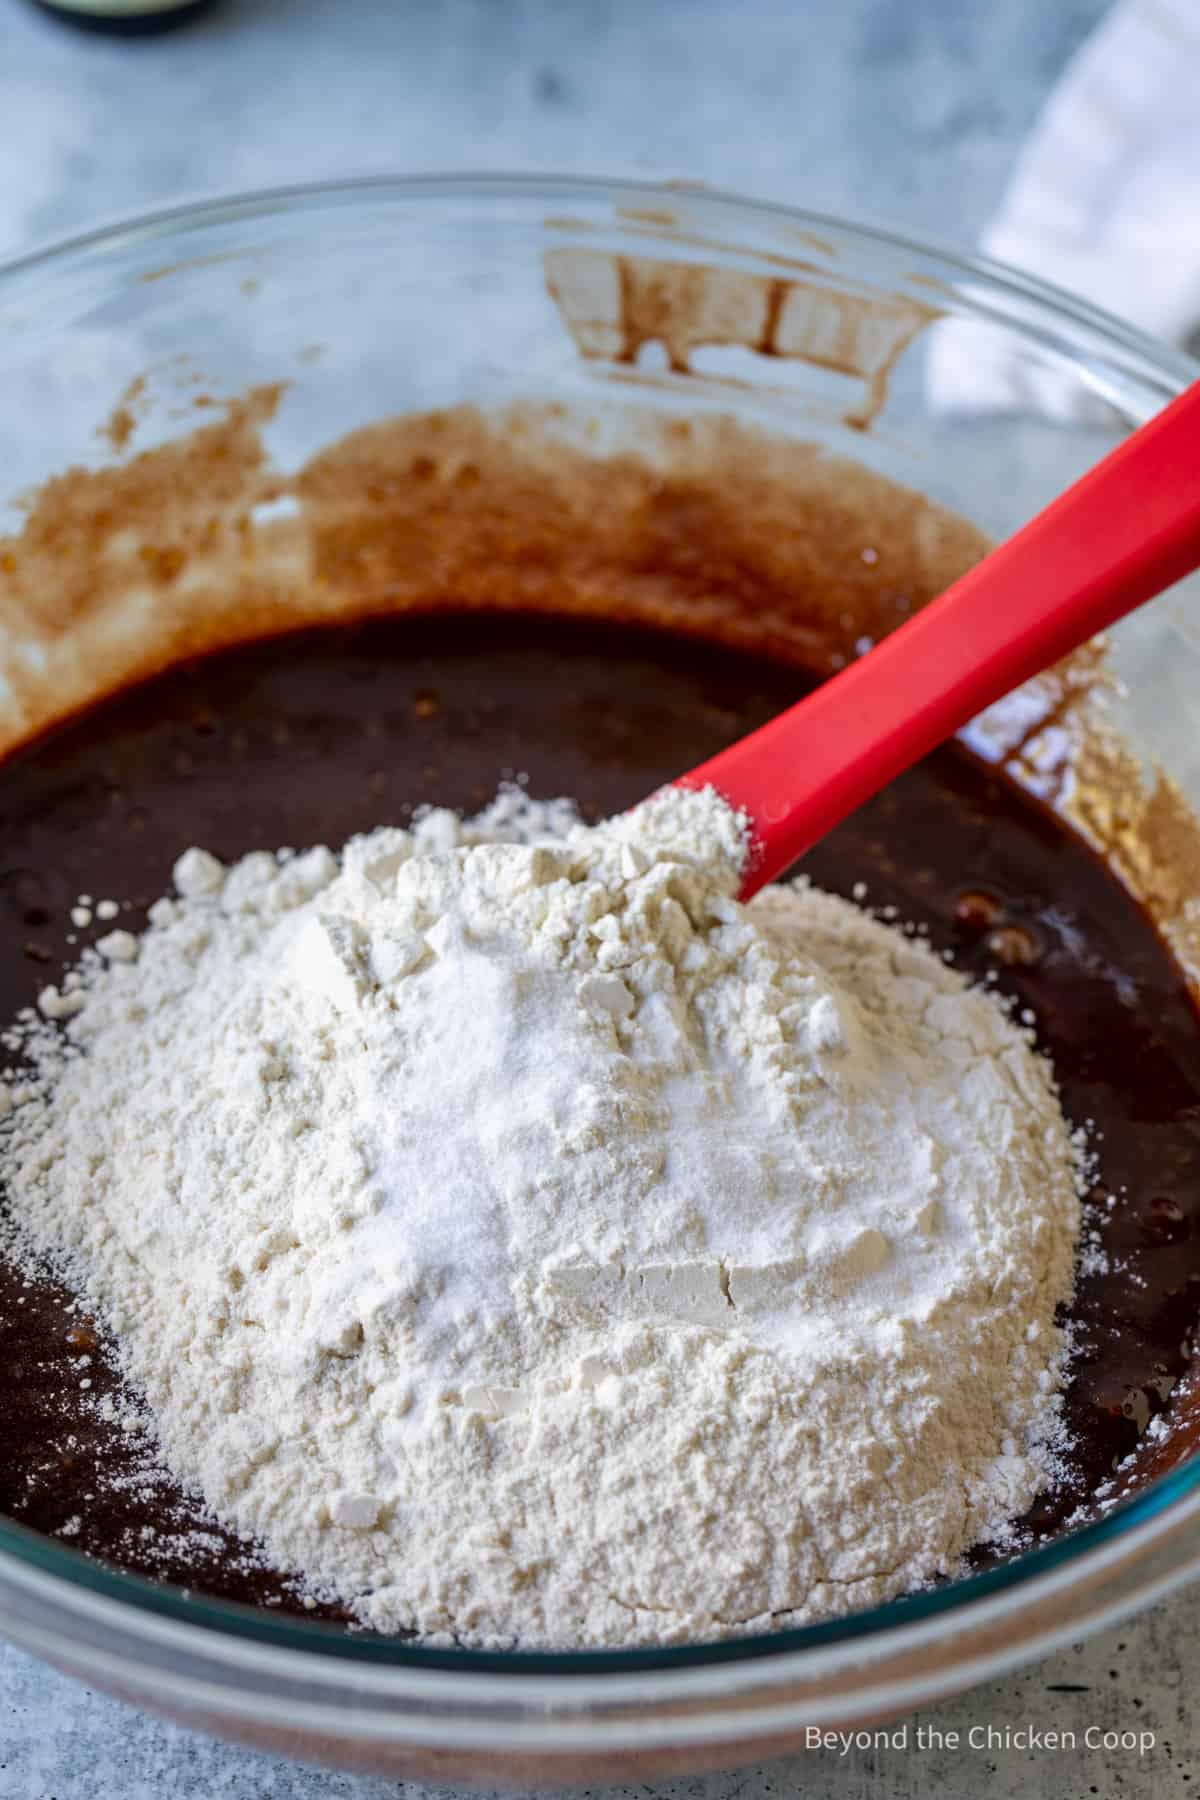 Flour being stirred into melted chocolate.